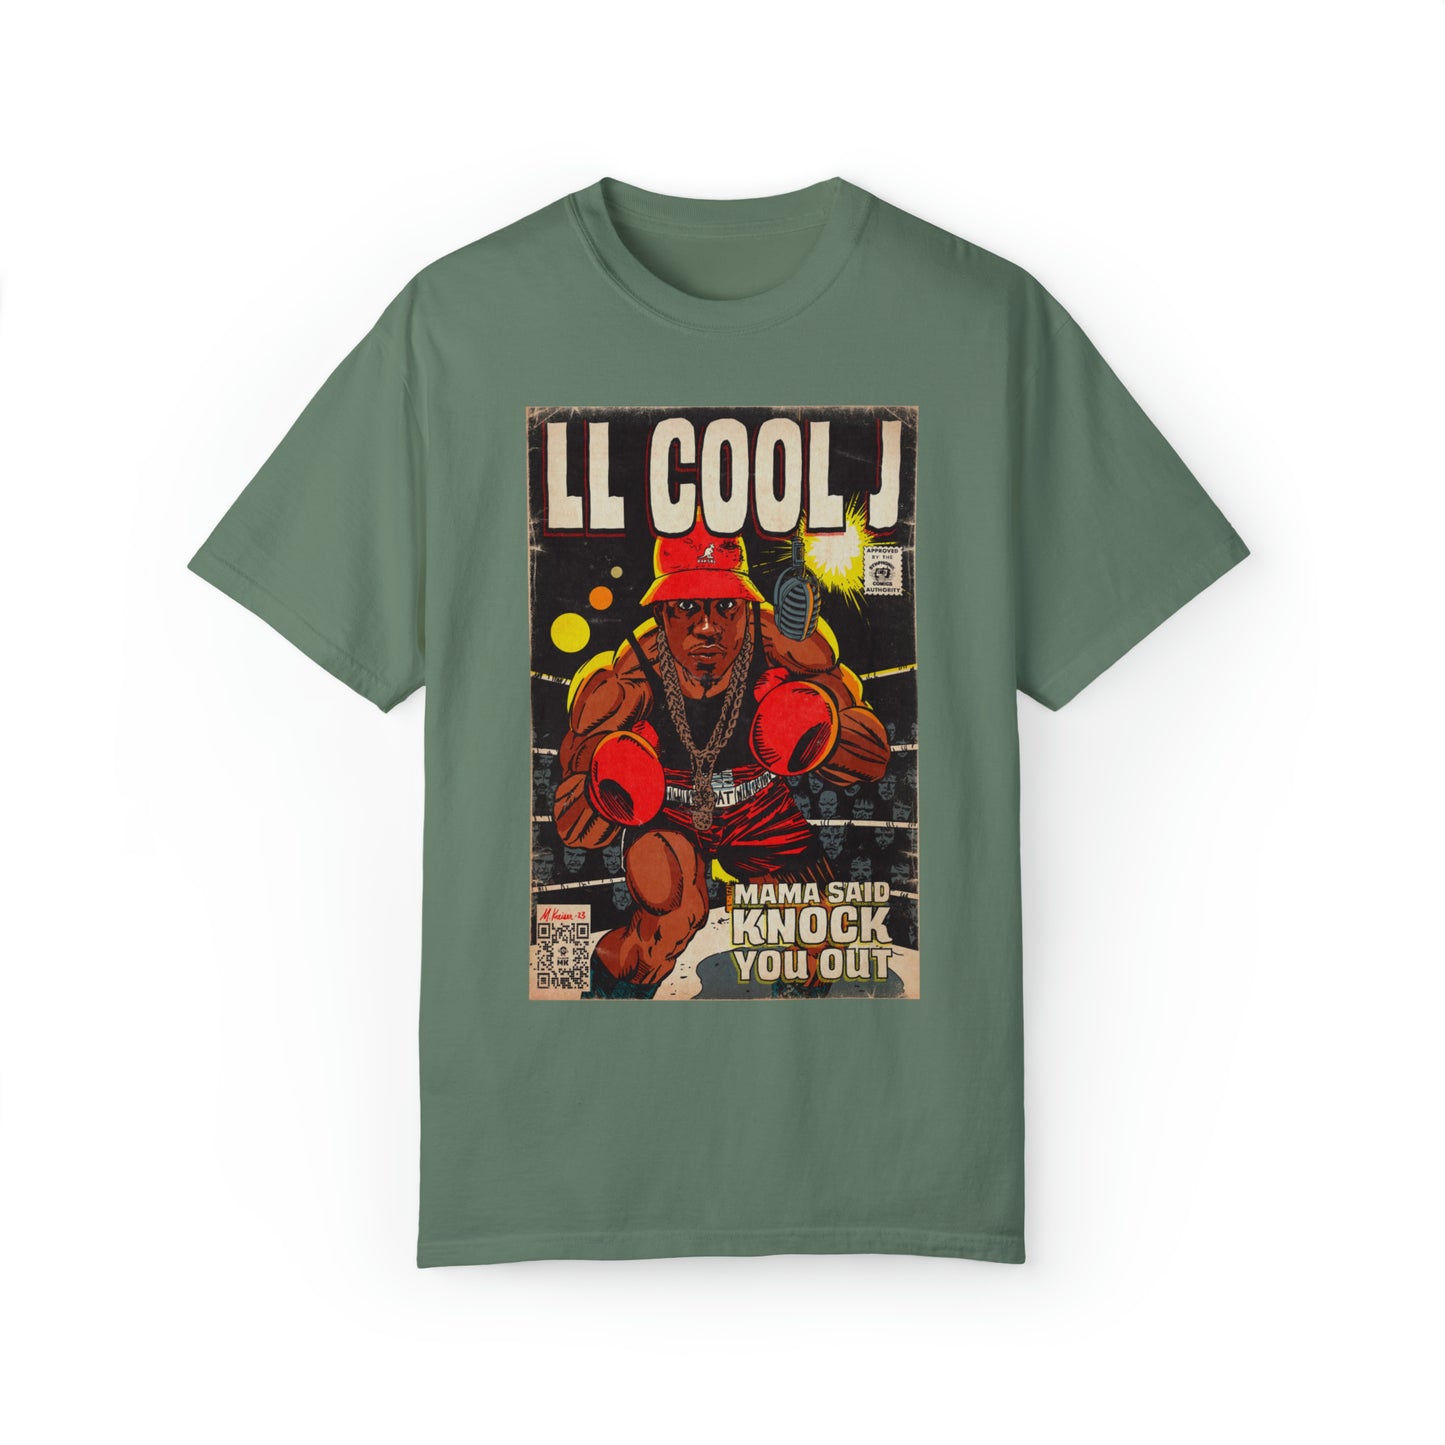 LL Cool J - Mama Said Knock You Out - Unisex Comfort Colors T-shirt